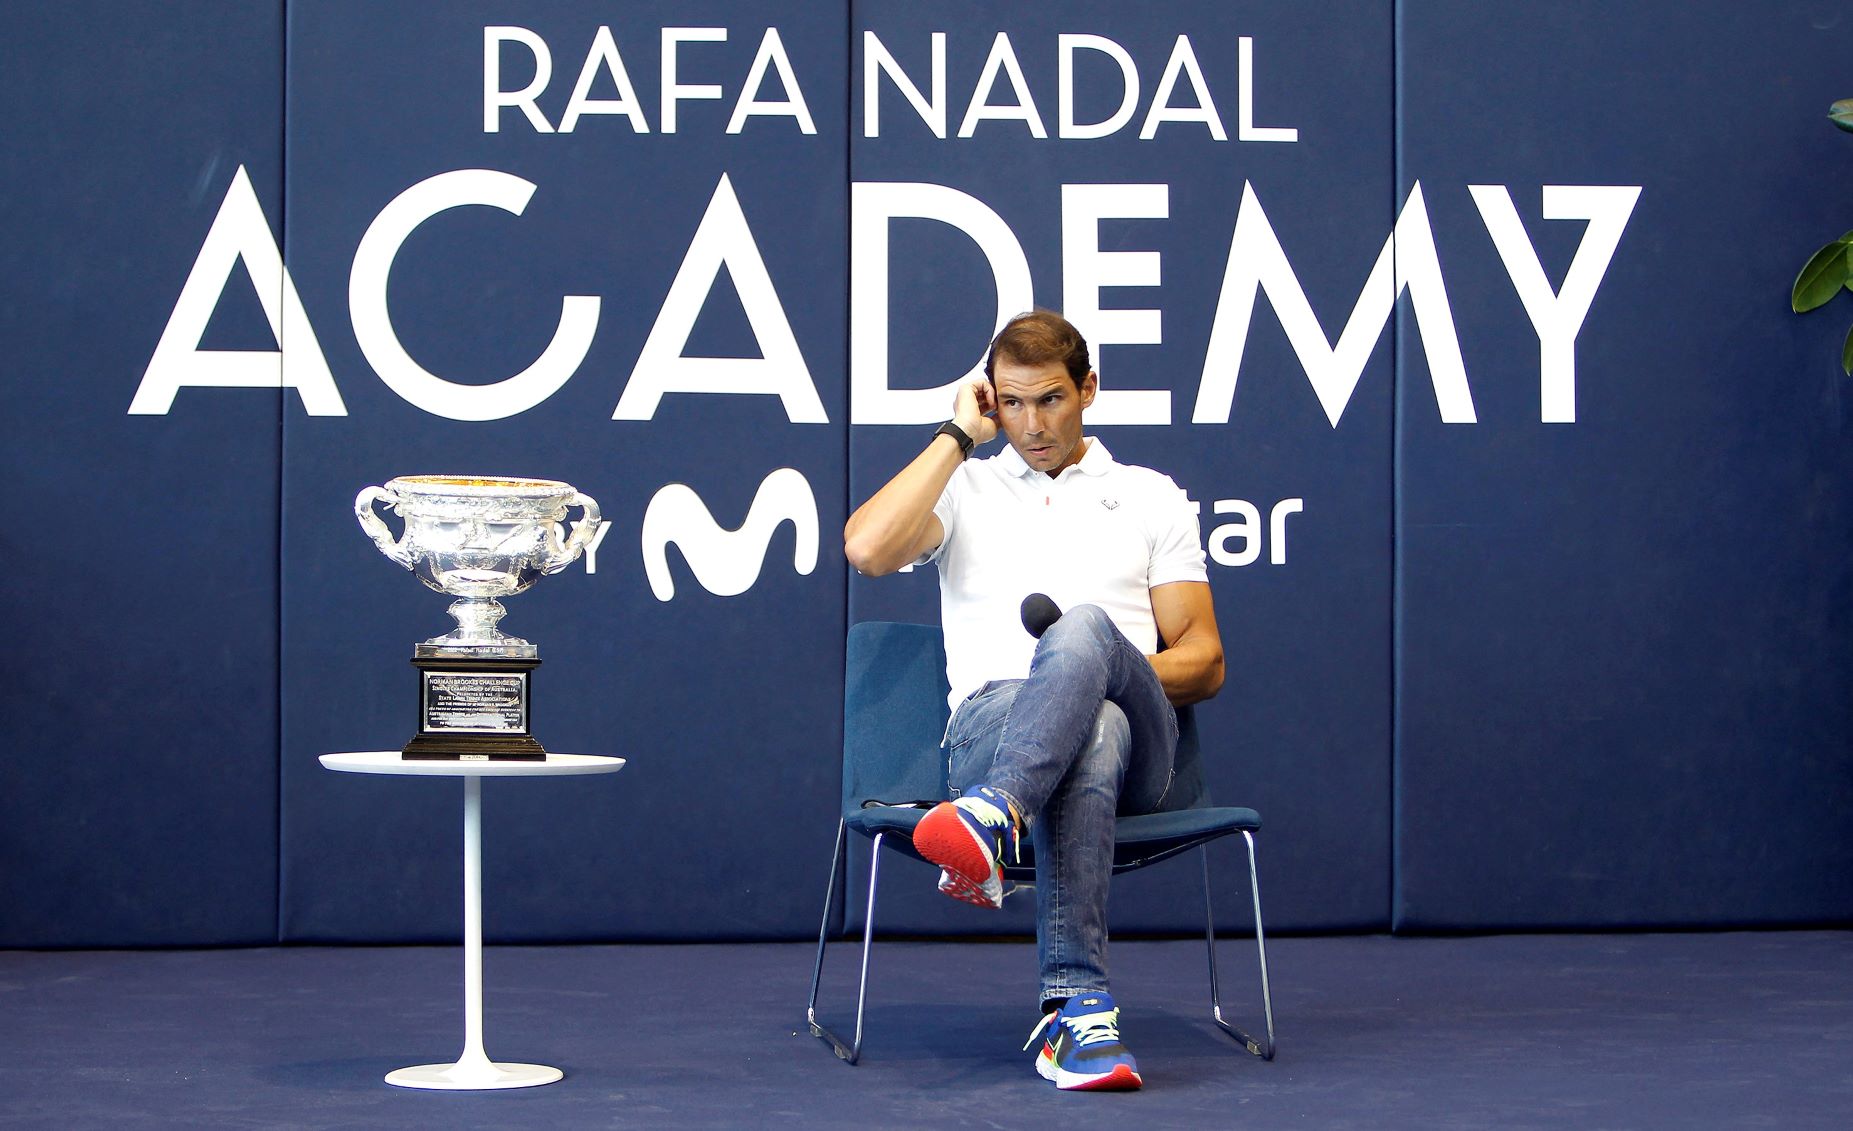 Rafael Nadal at a press conference after arriving in Spain from Australia, at the Rafa Nadal Academy by Movistar in Manacor